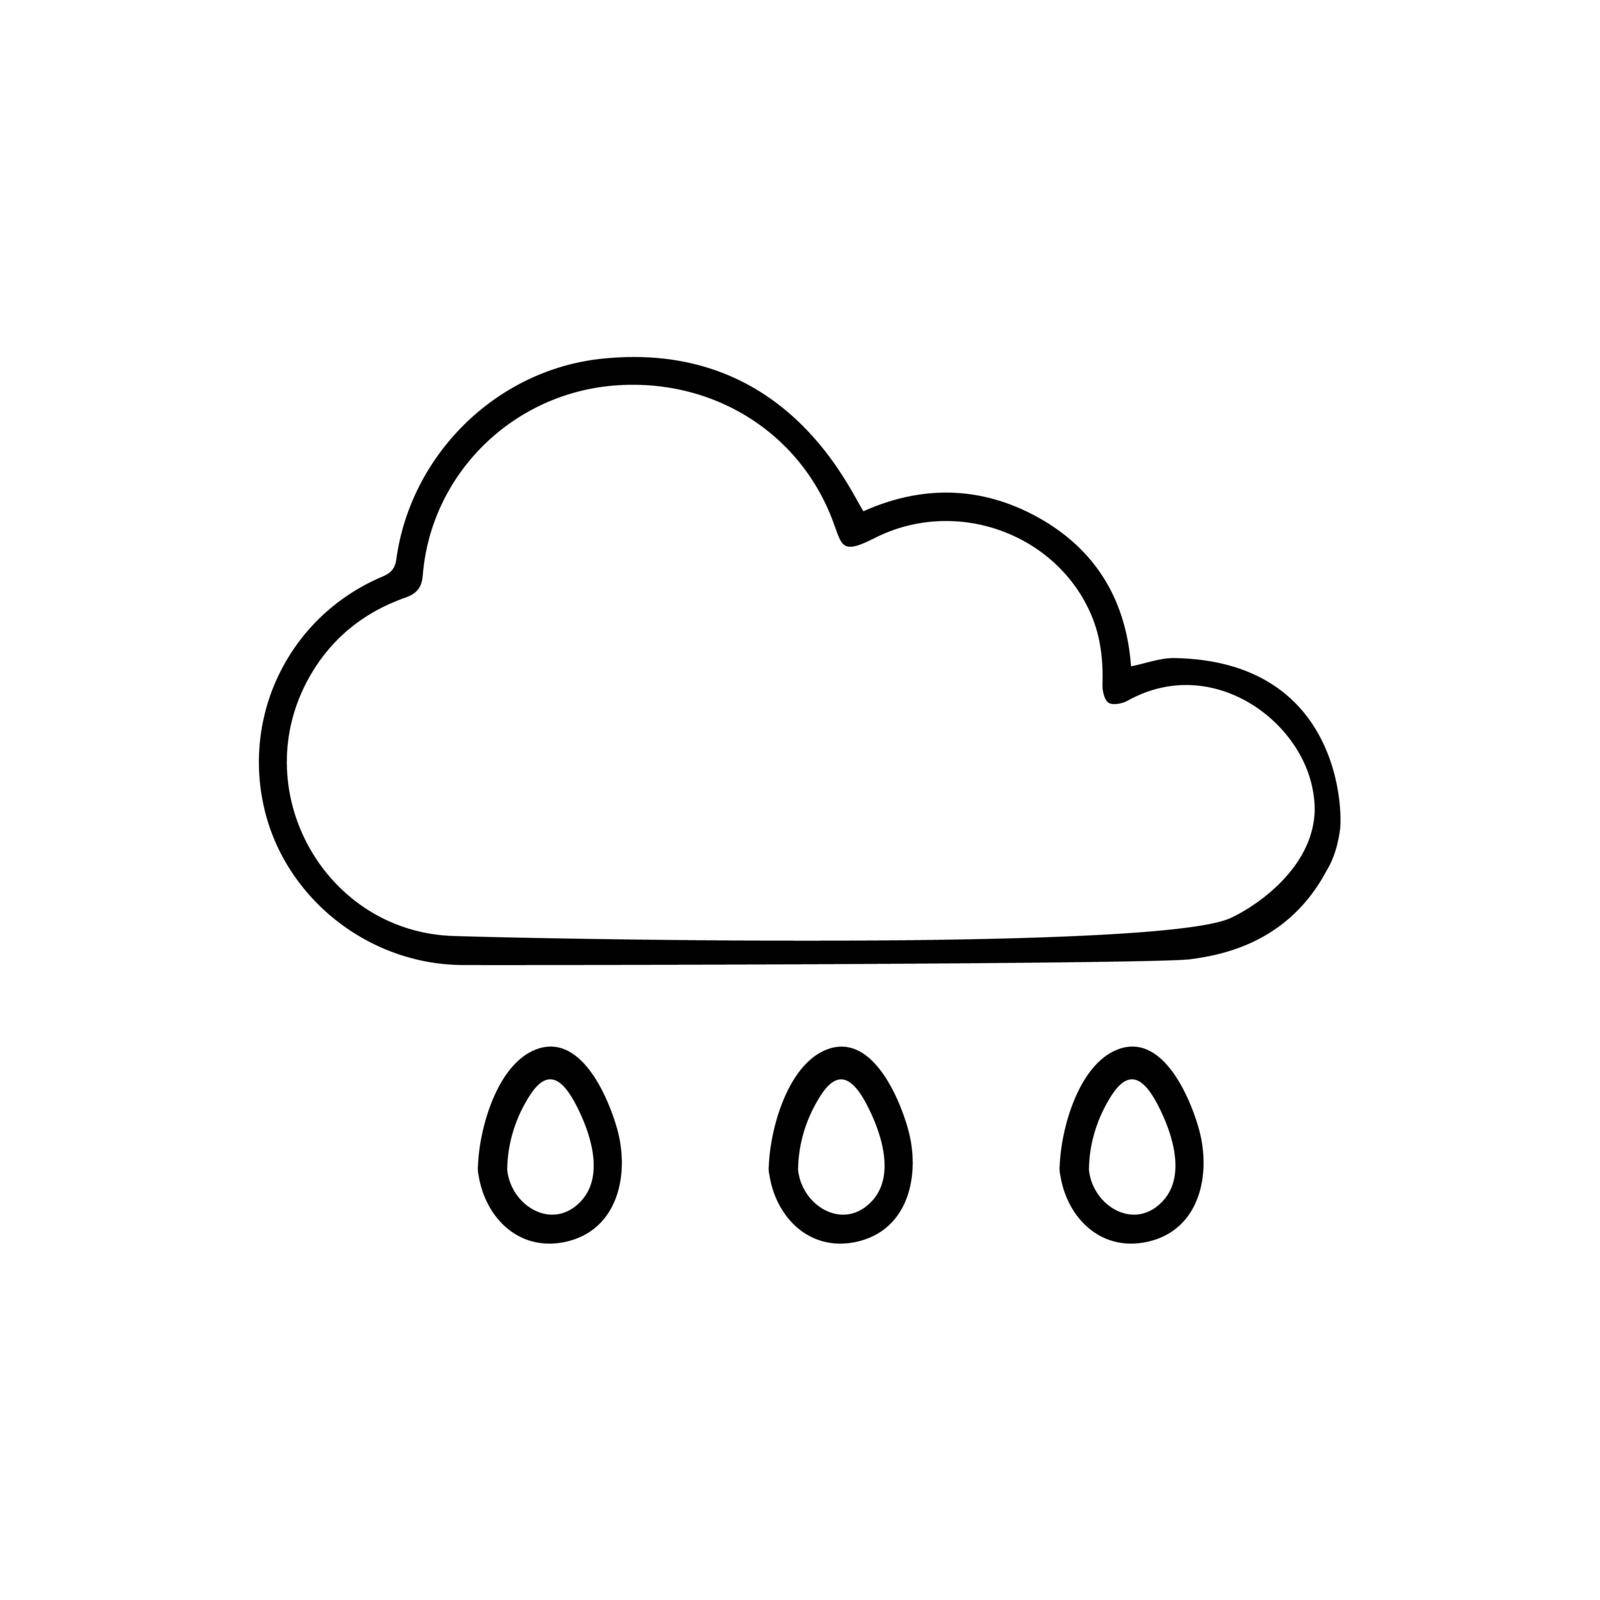 Rainy cloud thin line icon isolated on white background - Vector illustration